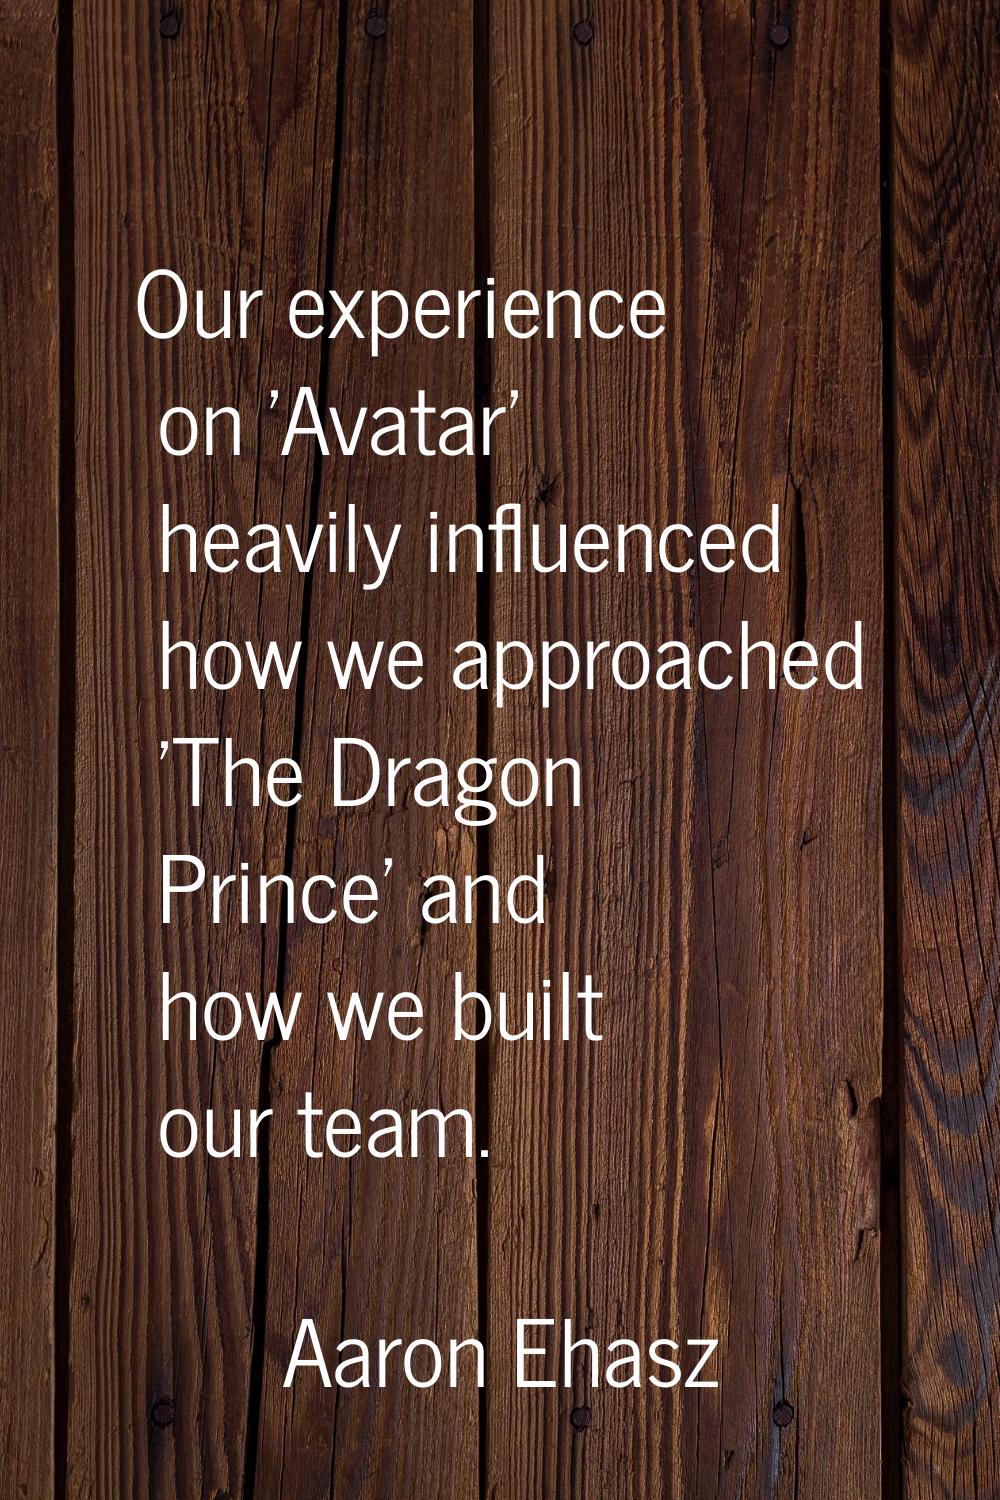 Our experience on 'Avatar' heavily influenced how we approached 'The Dragon Prince' and how we buil